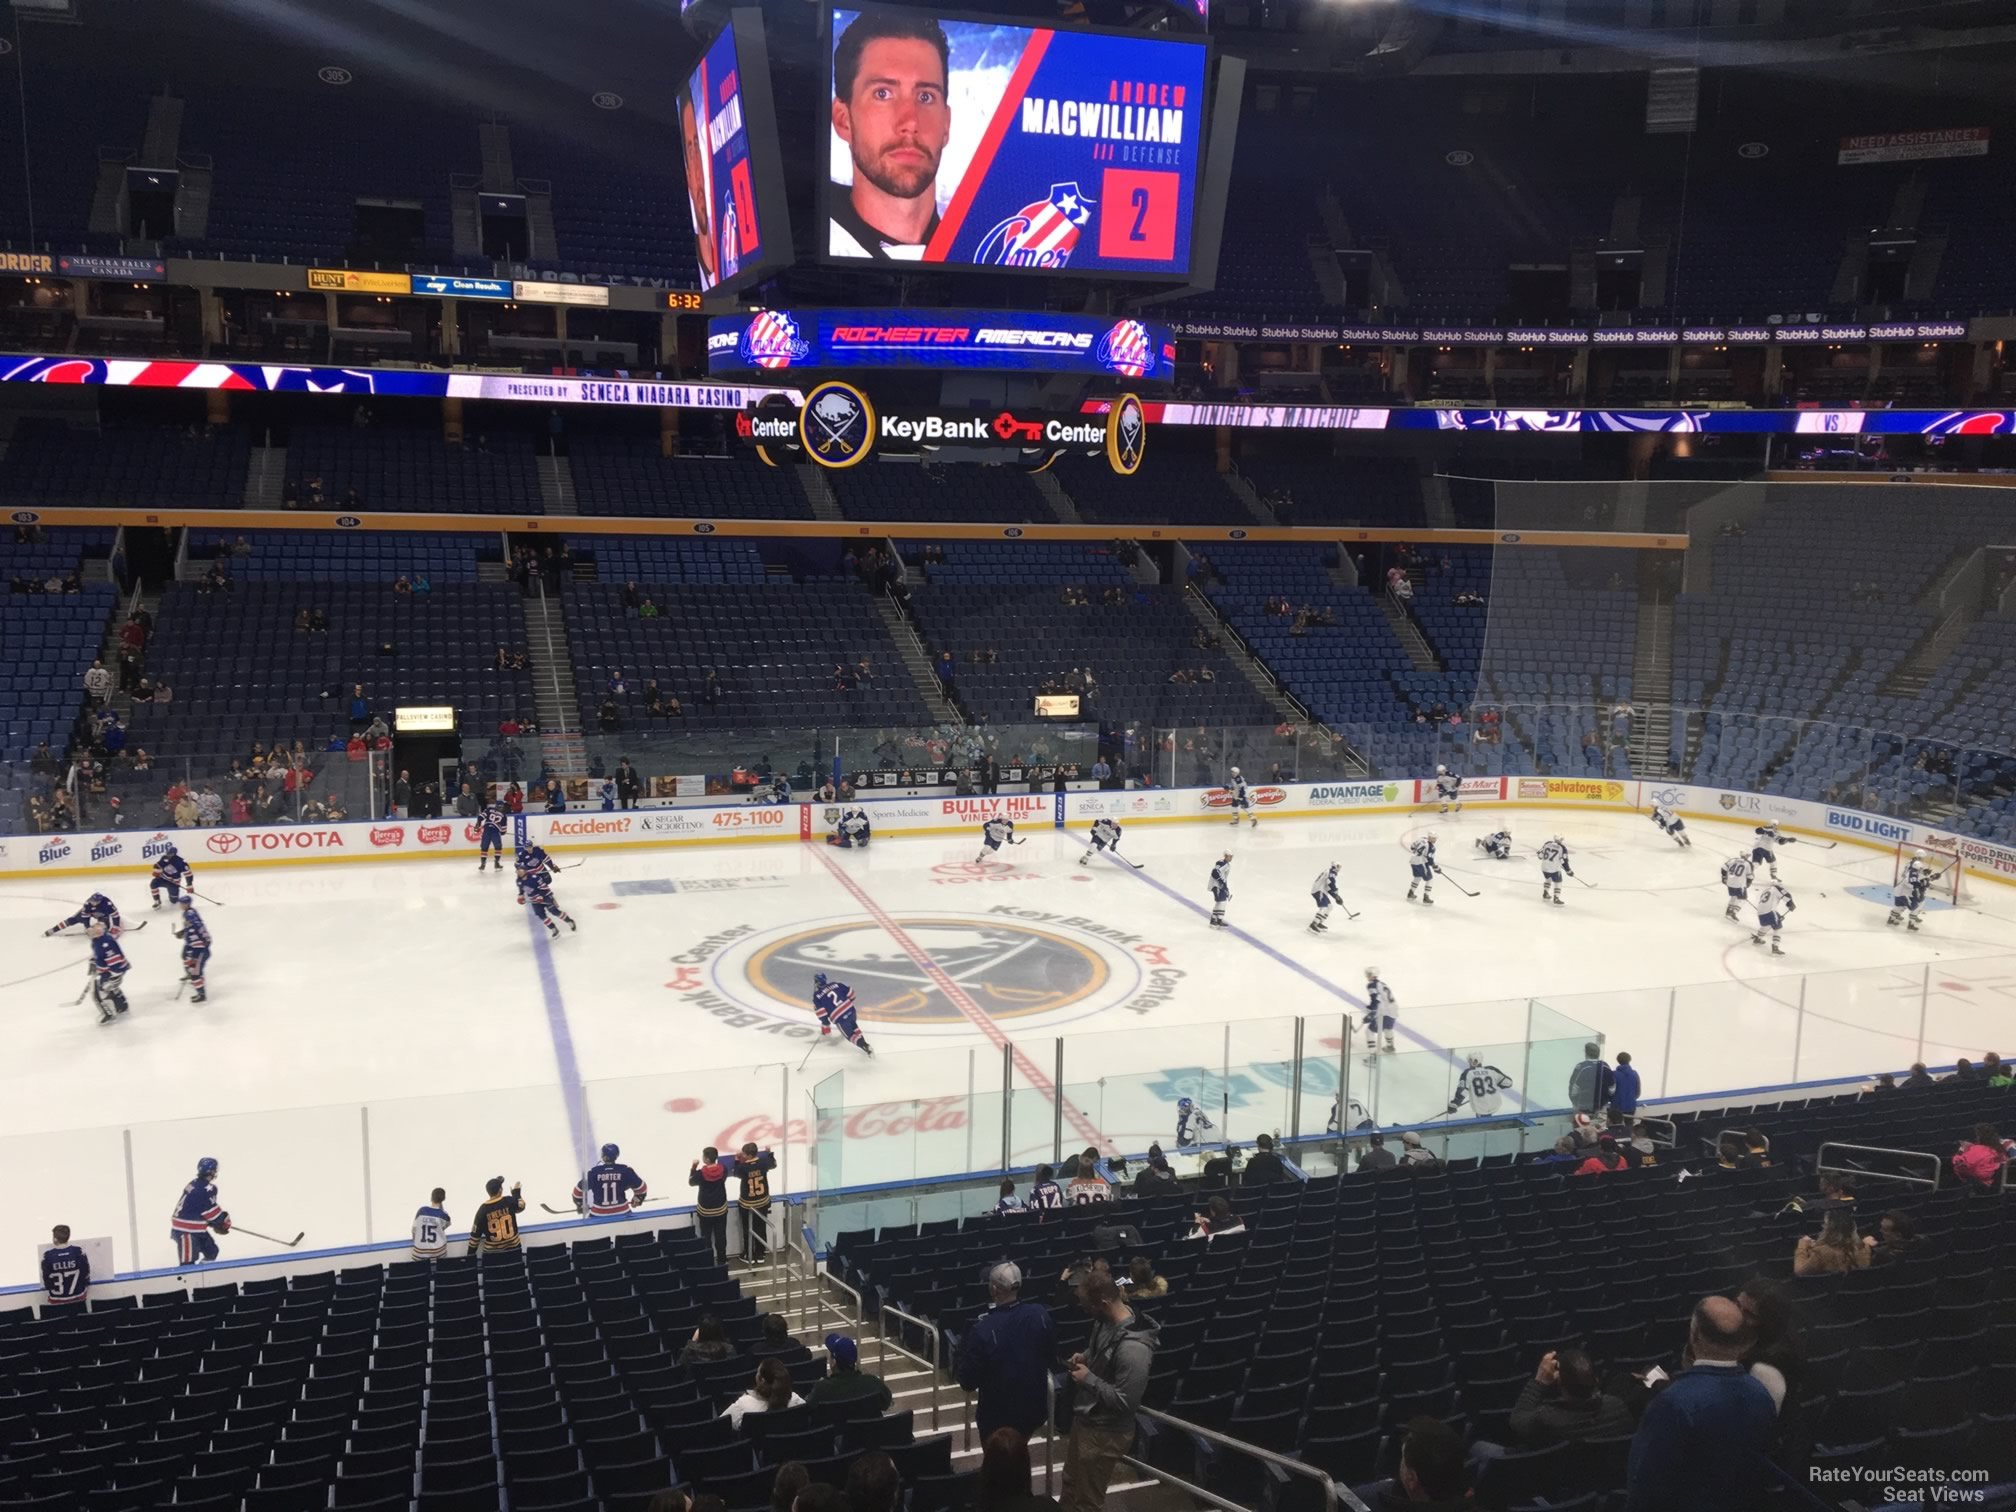 section 219, row 4 seat view  for hockey - keybank center